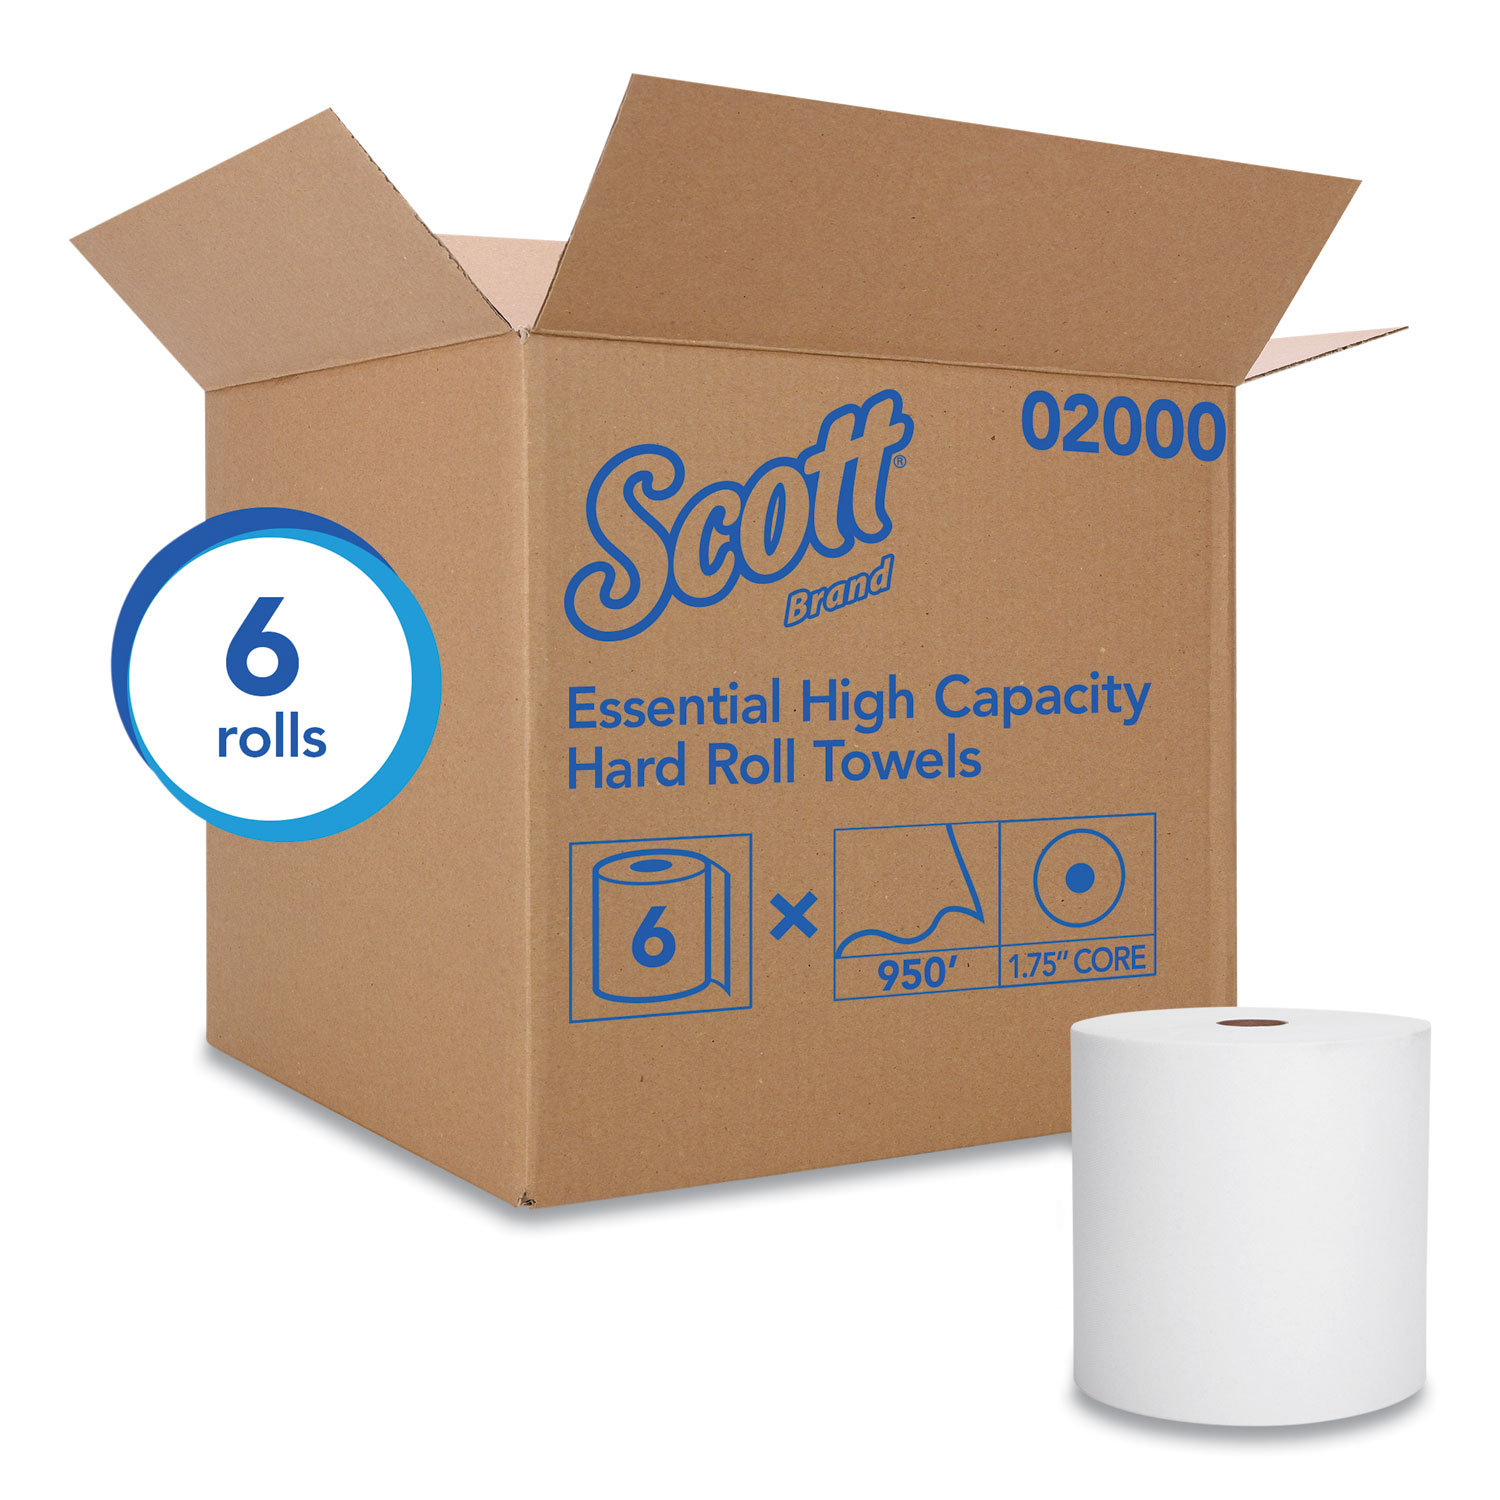 Scott Essential High Capacity Hard Roll Towels for Business, 1.75" Core, 8 x 950 ft, White,6 Rolls/CT -KCC02000 - image 2 of 7